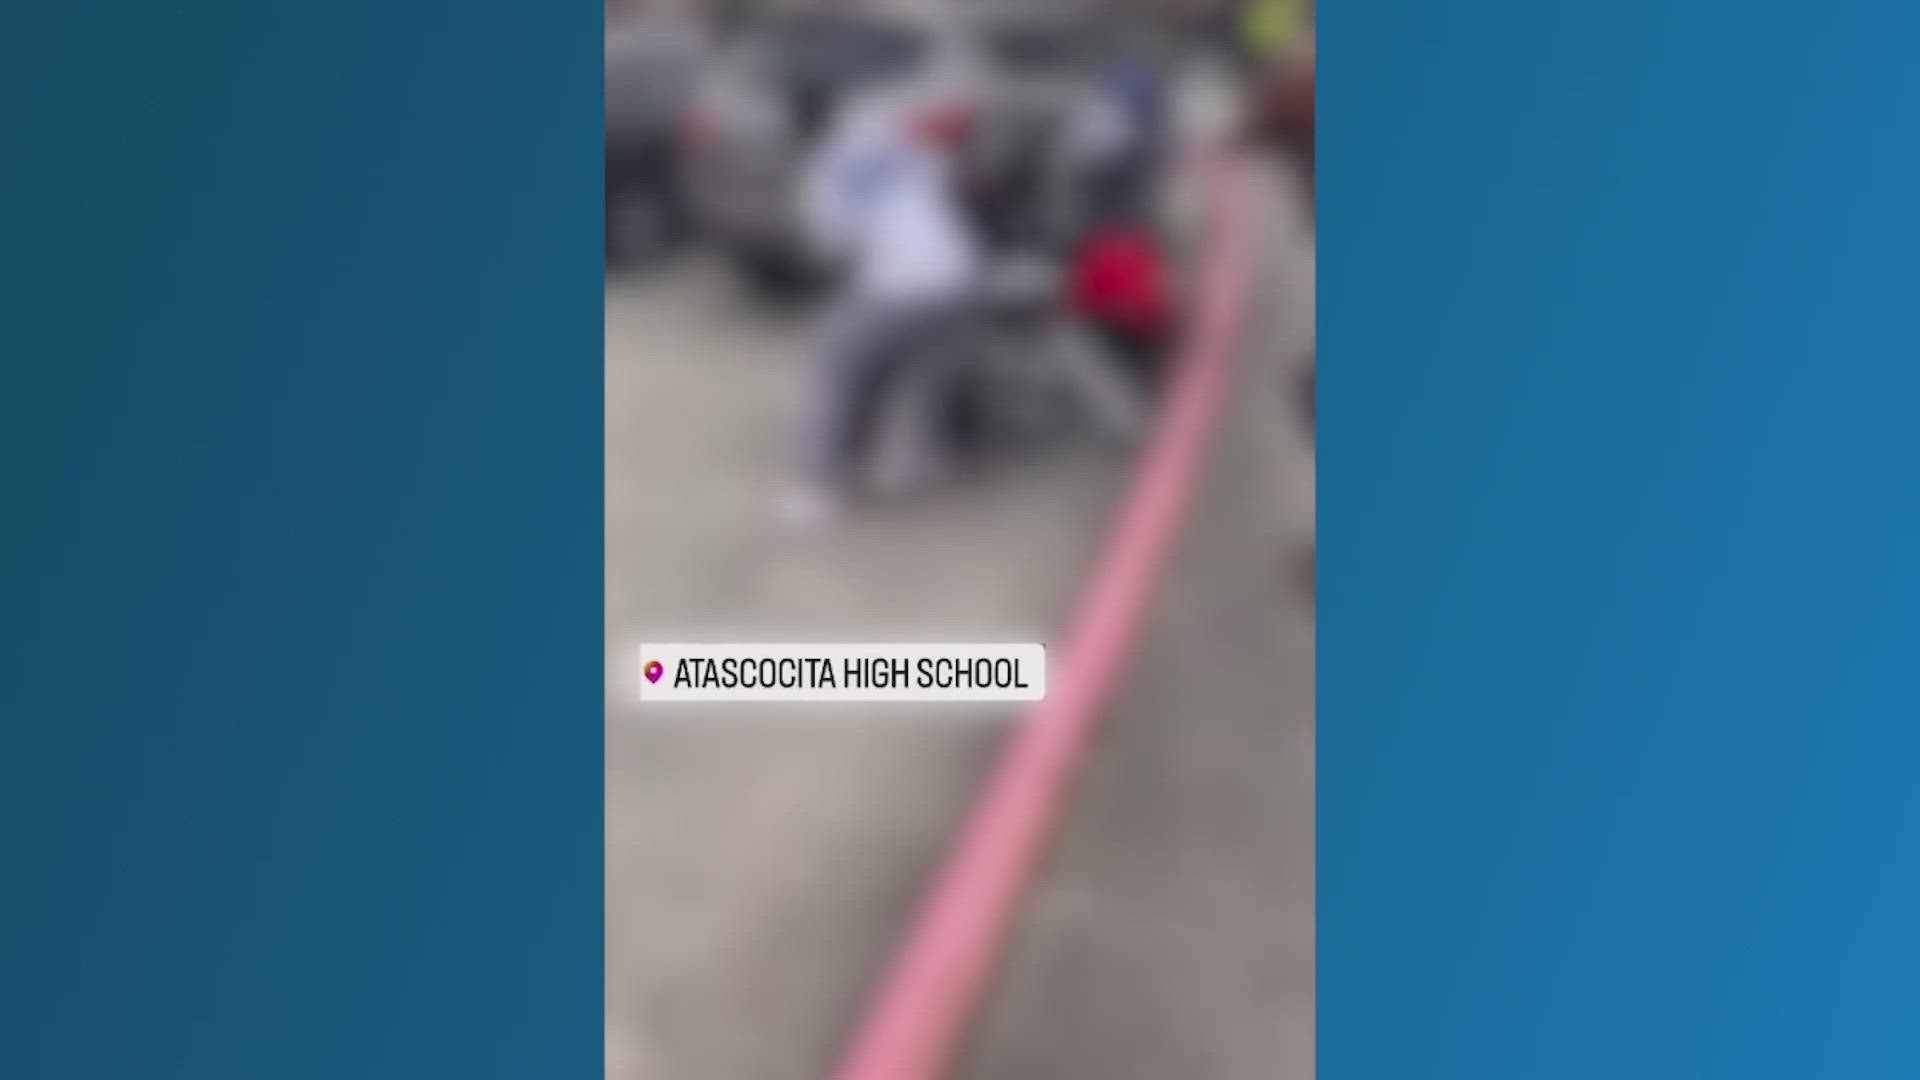 Humble ISD officials said more charges are possible in connection with fights at Atascocita High School.